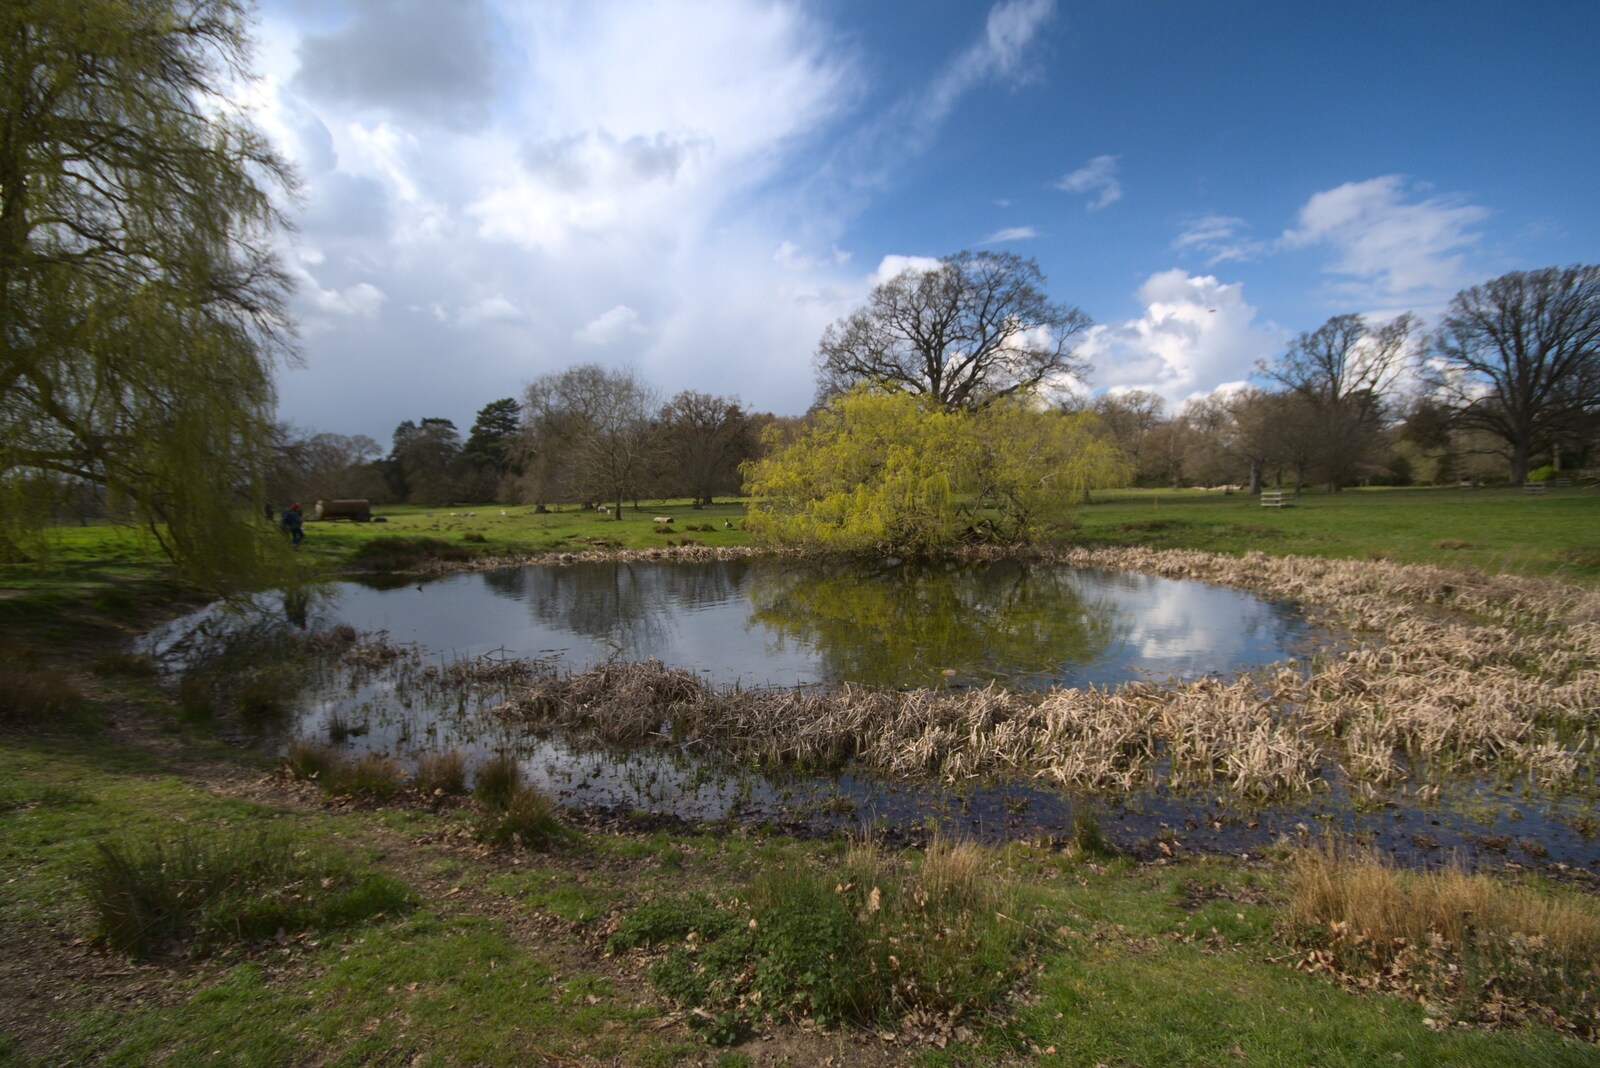 The pond at Ickworth from A Return to Ickworth House, Horringer, Suffolk - 11th April 2021